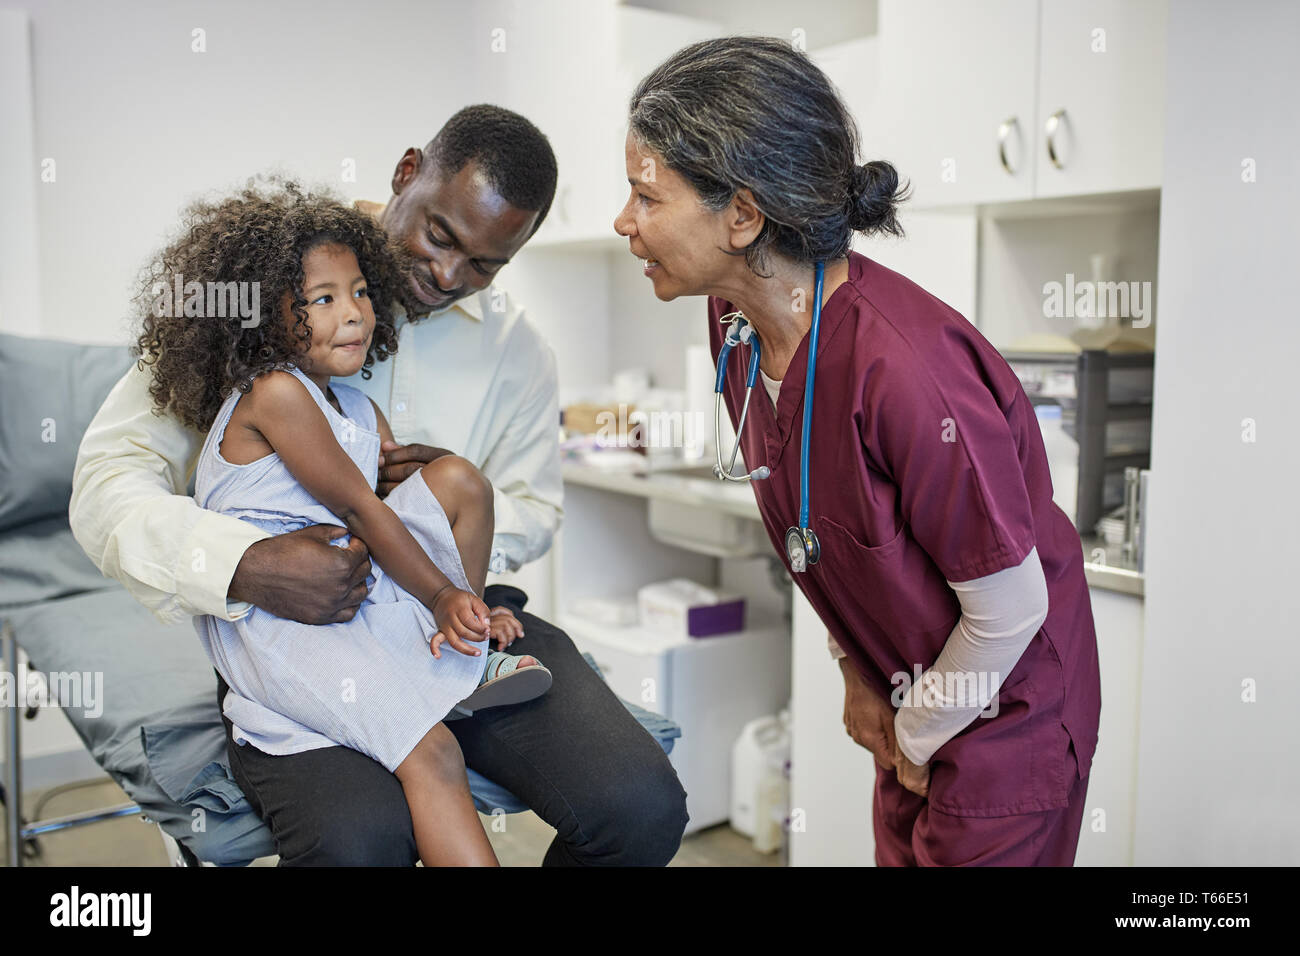 Female pediatrician talking to father and daughter in clinic examination room Stock Photo